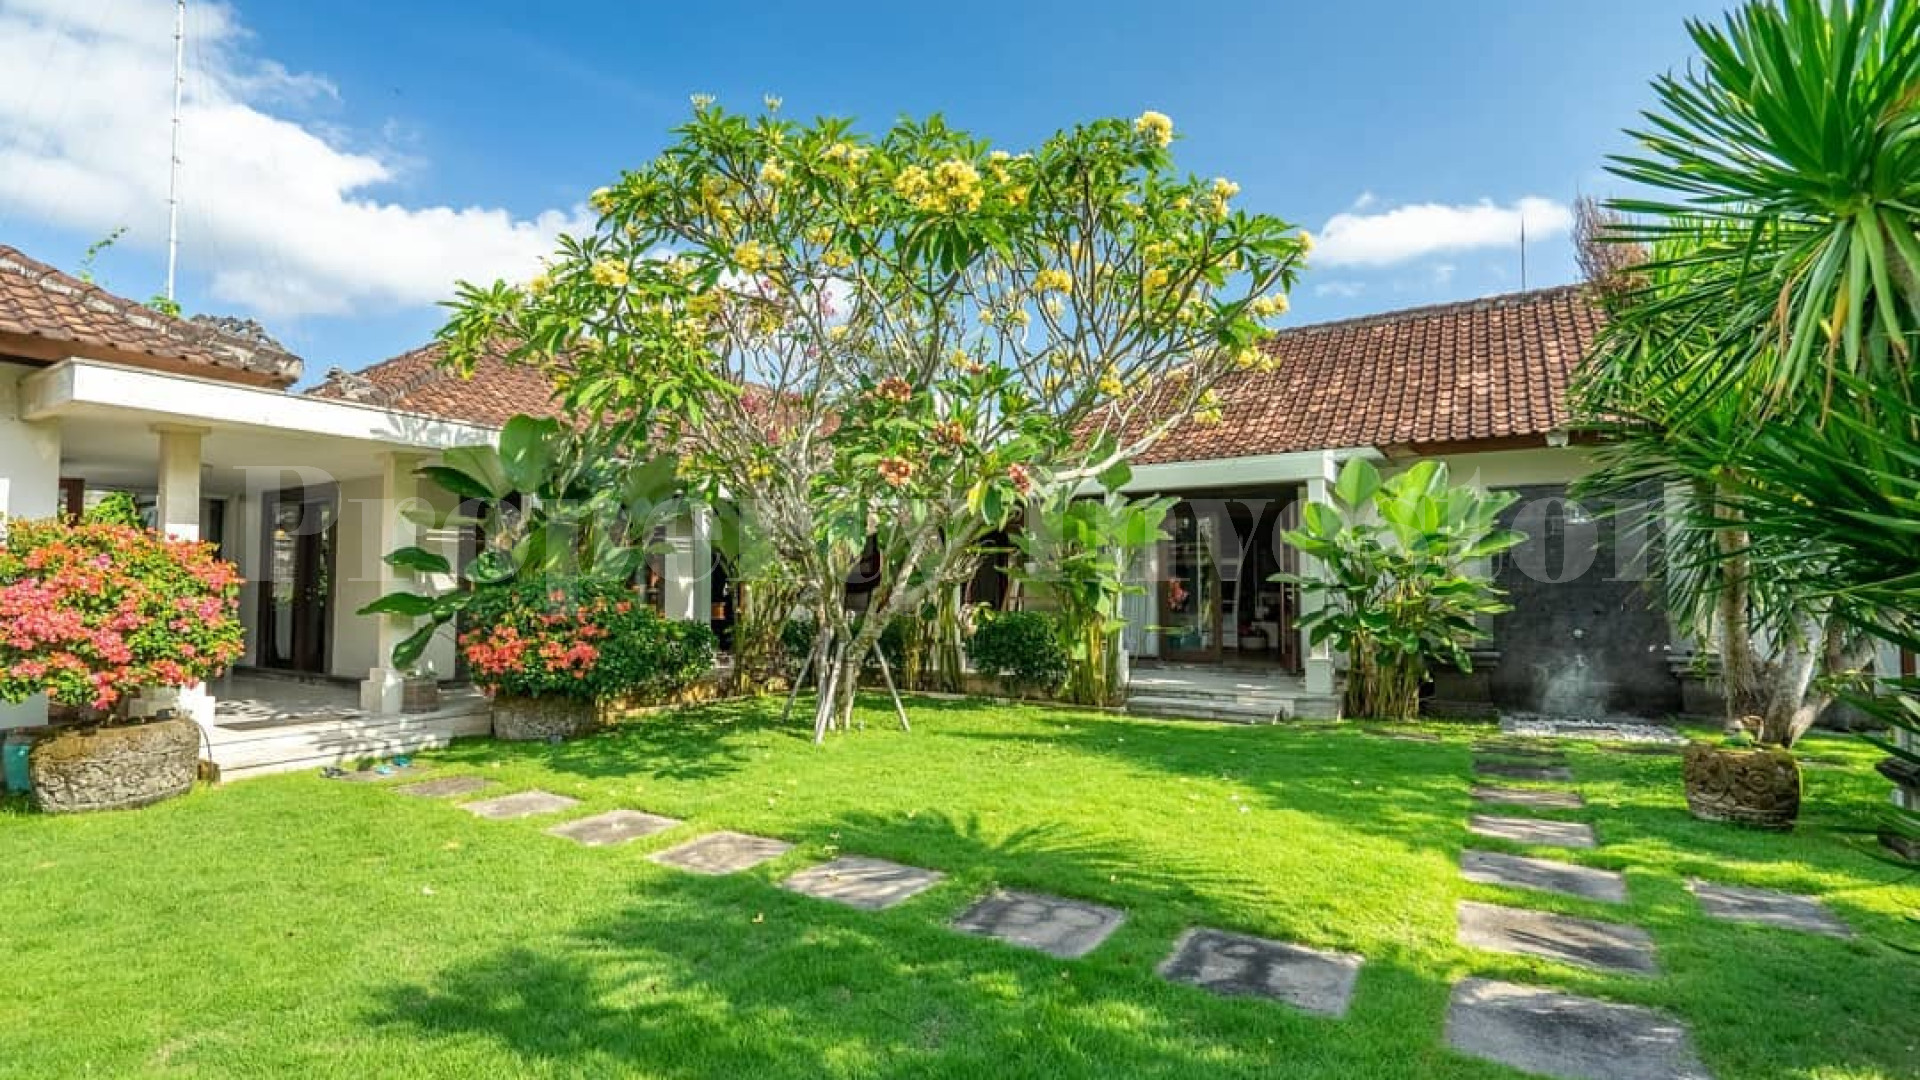 Serene 5 Bedroom Villa with Amazing River Valley Views for Sale in Tabanan, Bali